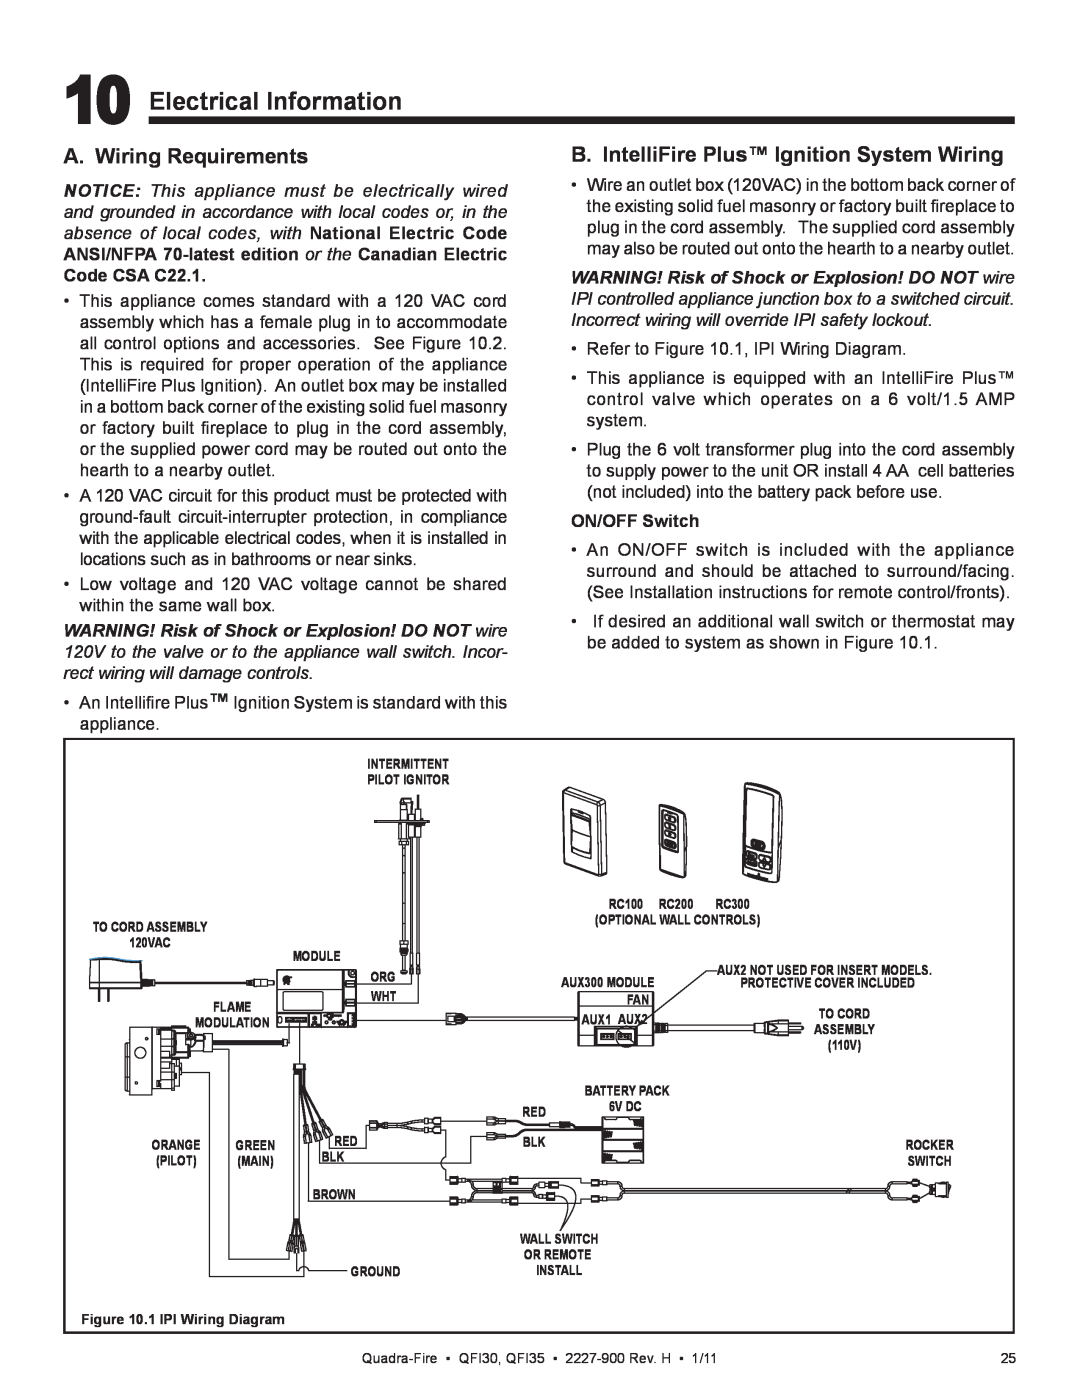 Quadra-Fire QF130 owner manual Electrical Information, A. Wiring Requirements, B. IntelliFire Plus Ignition System Wiring 